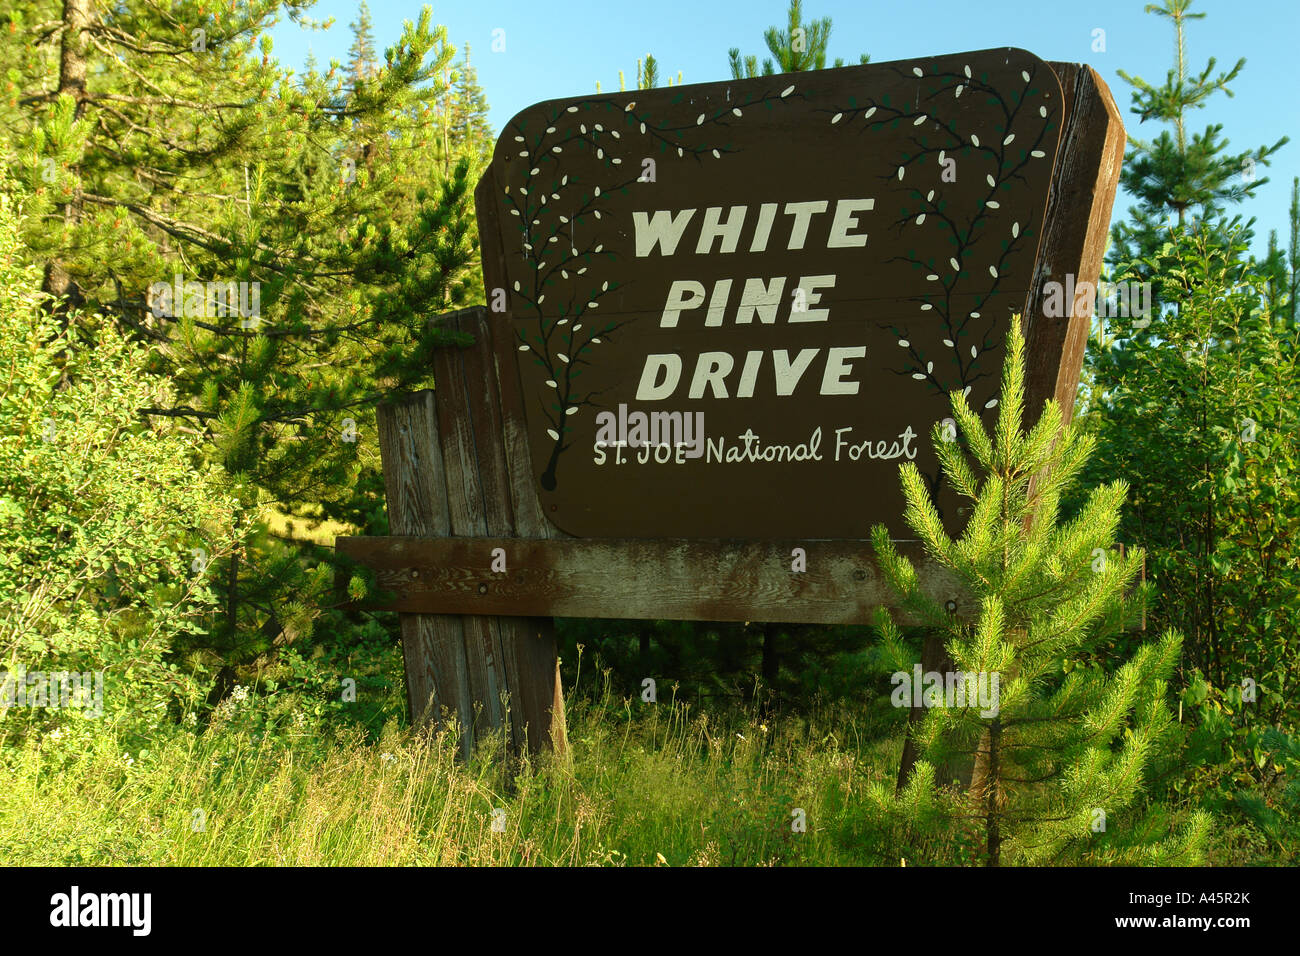 AJD56243, St. Joe National Forest, ID, Idaho, White Pine Drive, wooden road sign Stock Photo